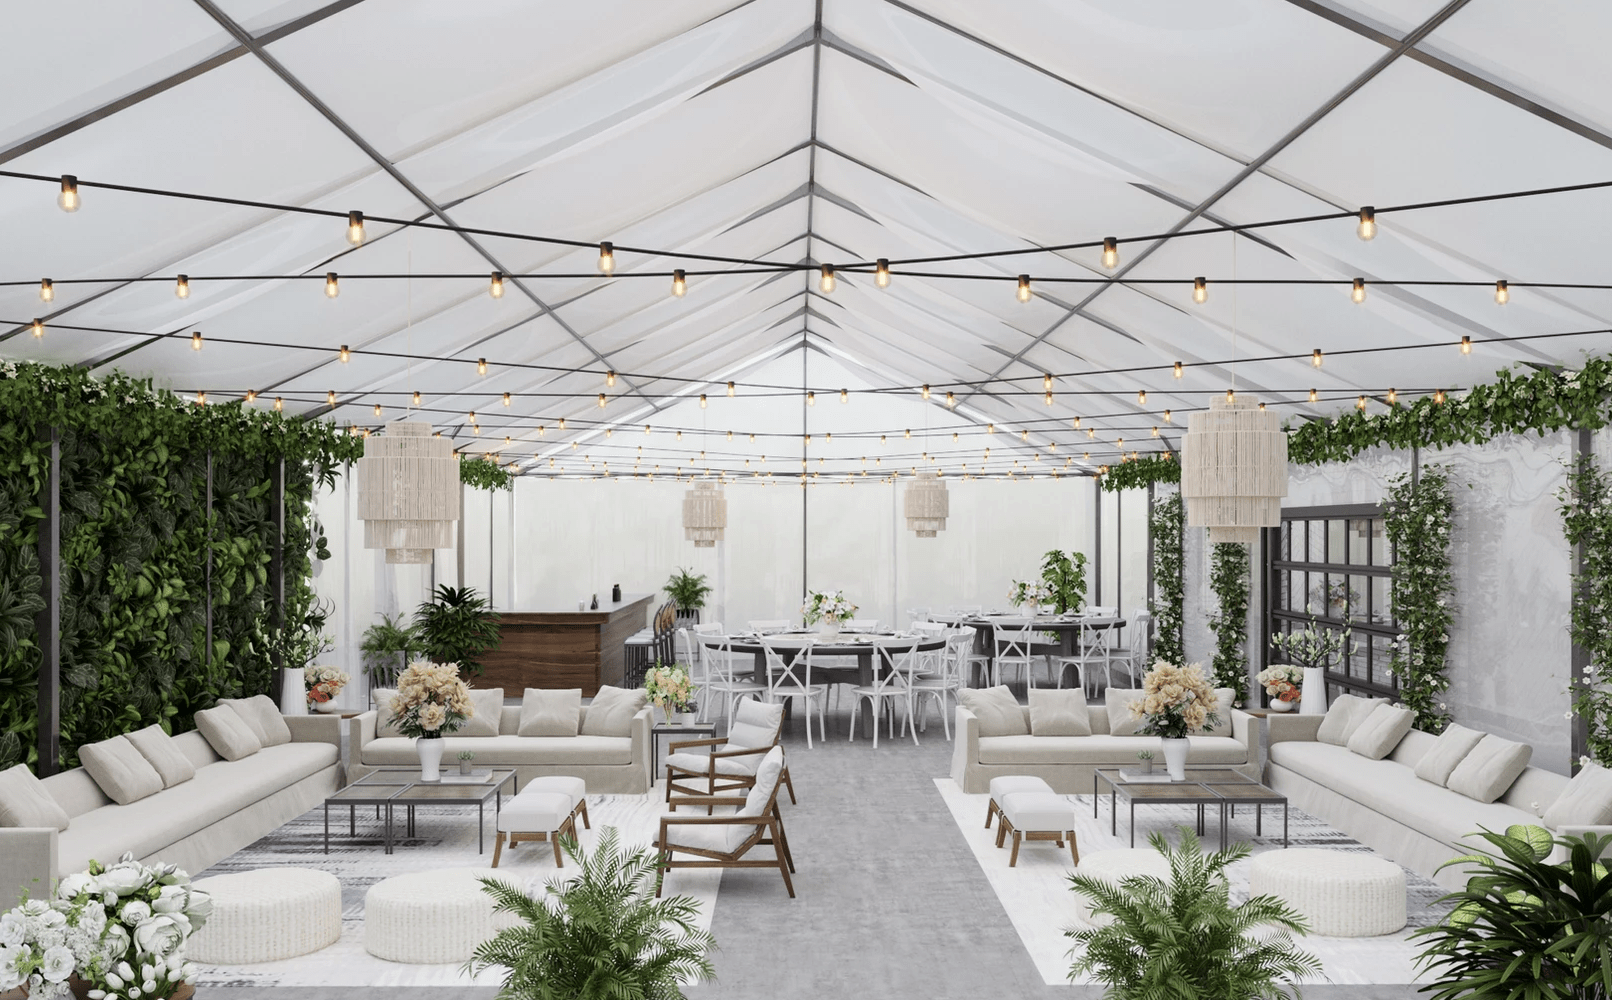 A tent rendering at The Collins off Main in Ann Arbor, MI.